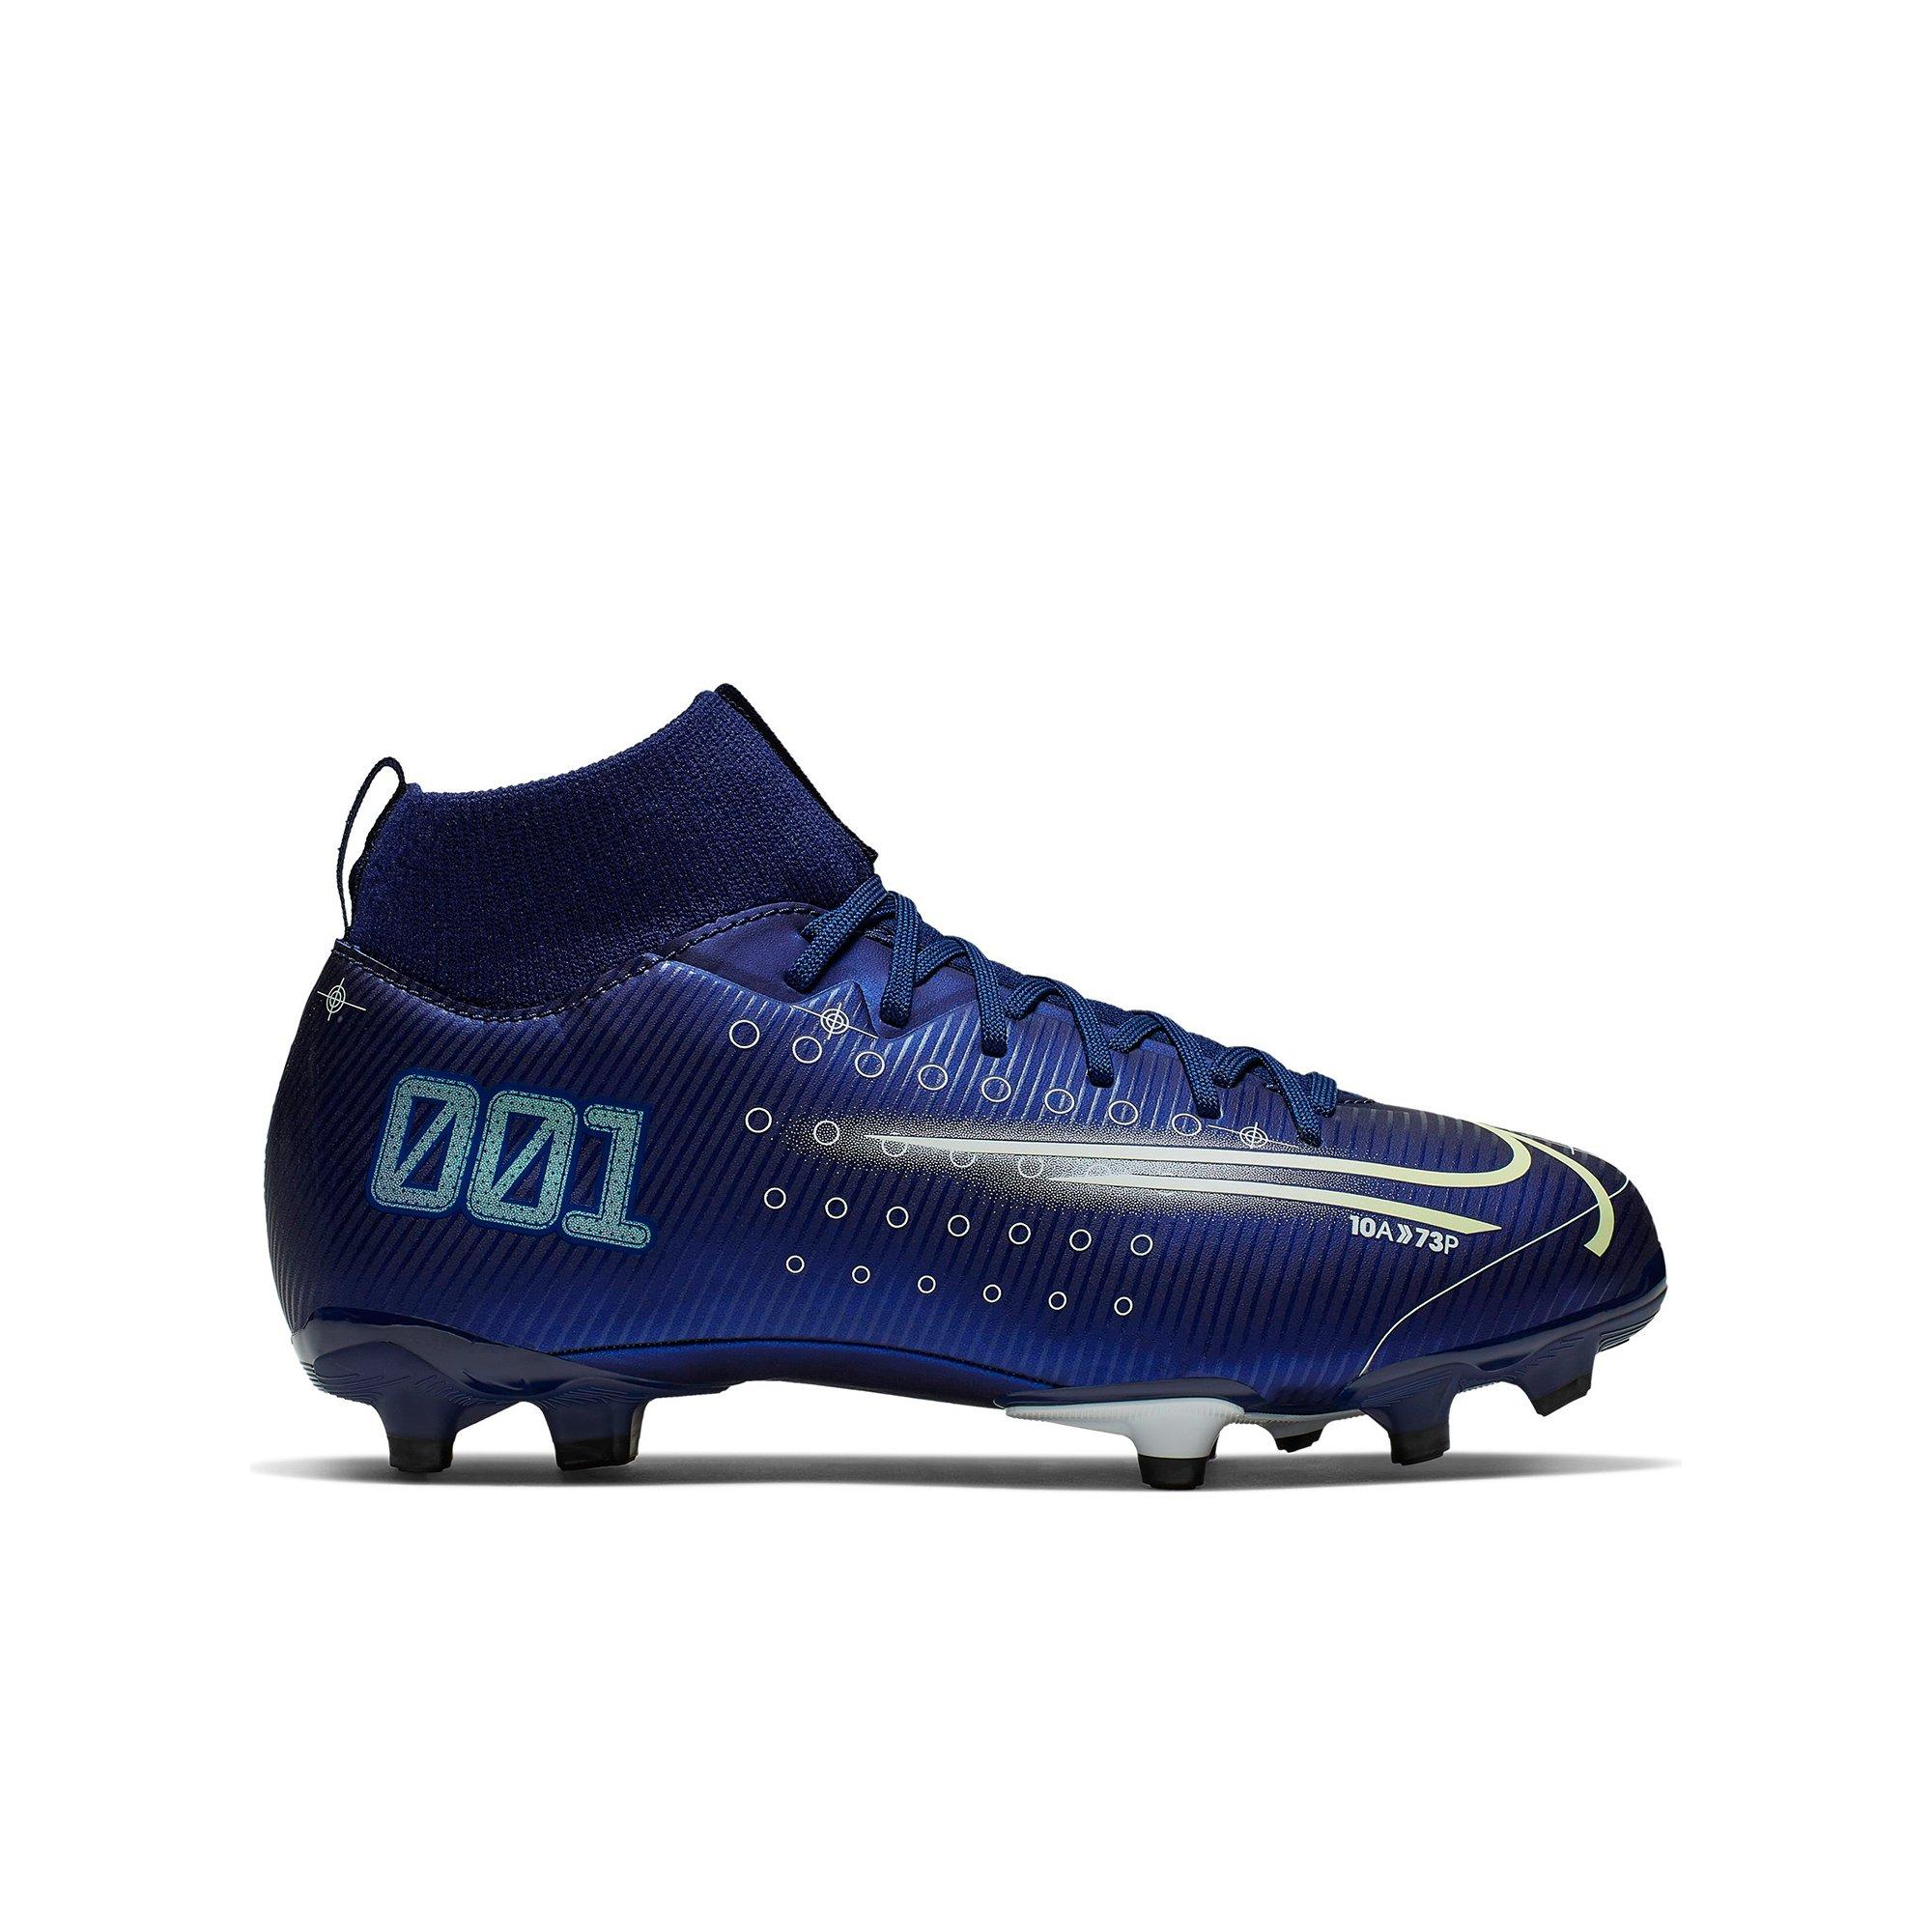 Nike Mercurial Superfly 7 Academy Indoor Soccer Shoes.